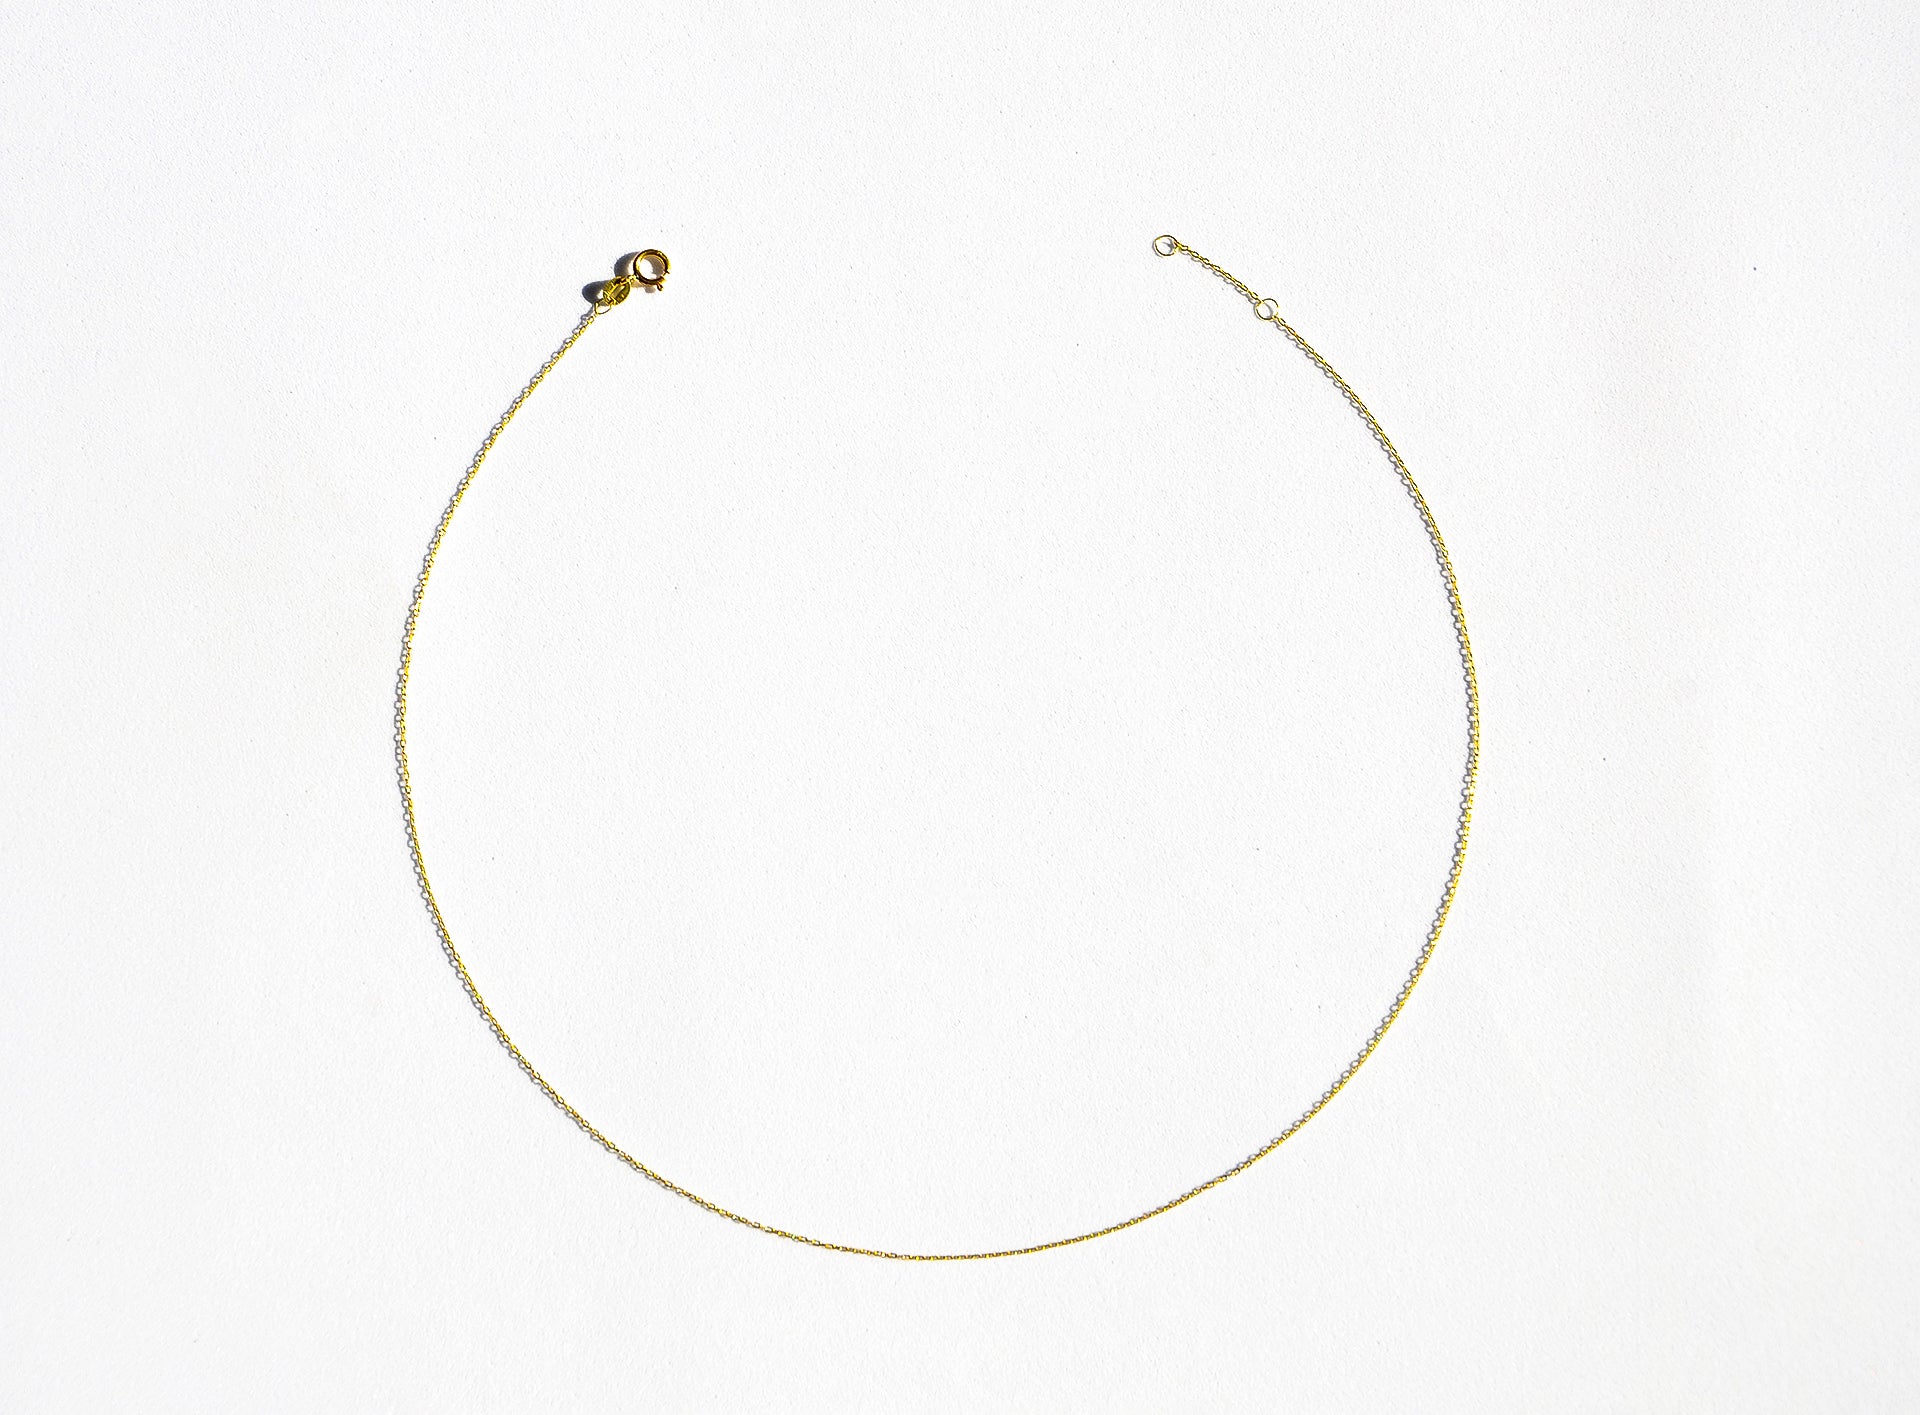 Gorgeous Thin and Delicate 18k Gold Necklace